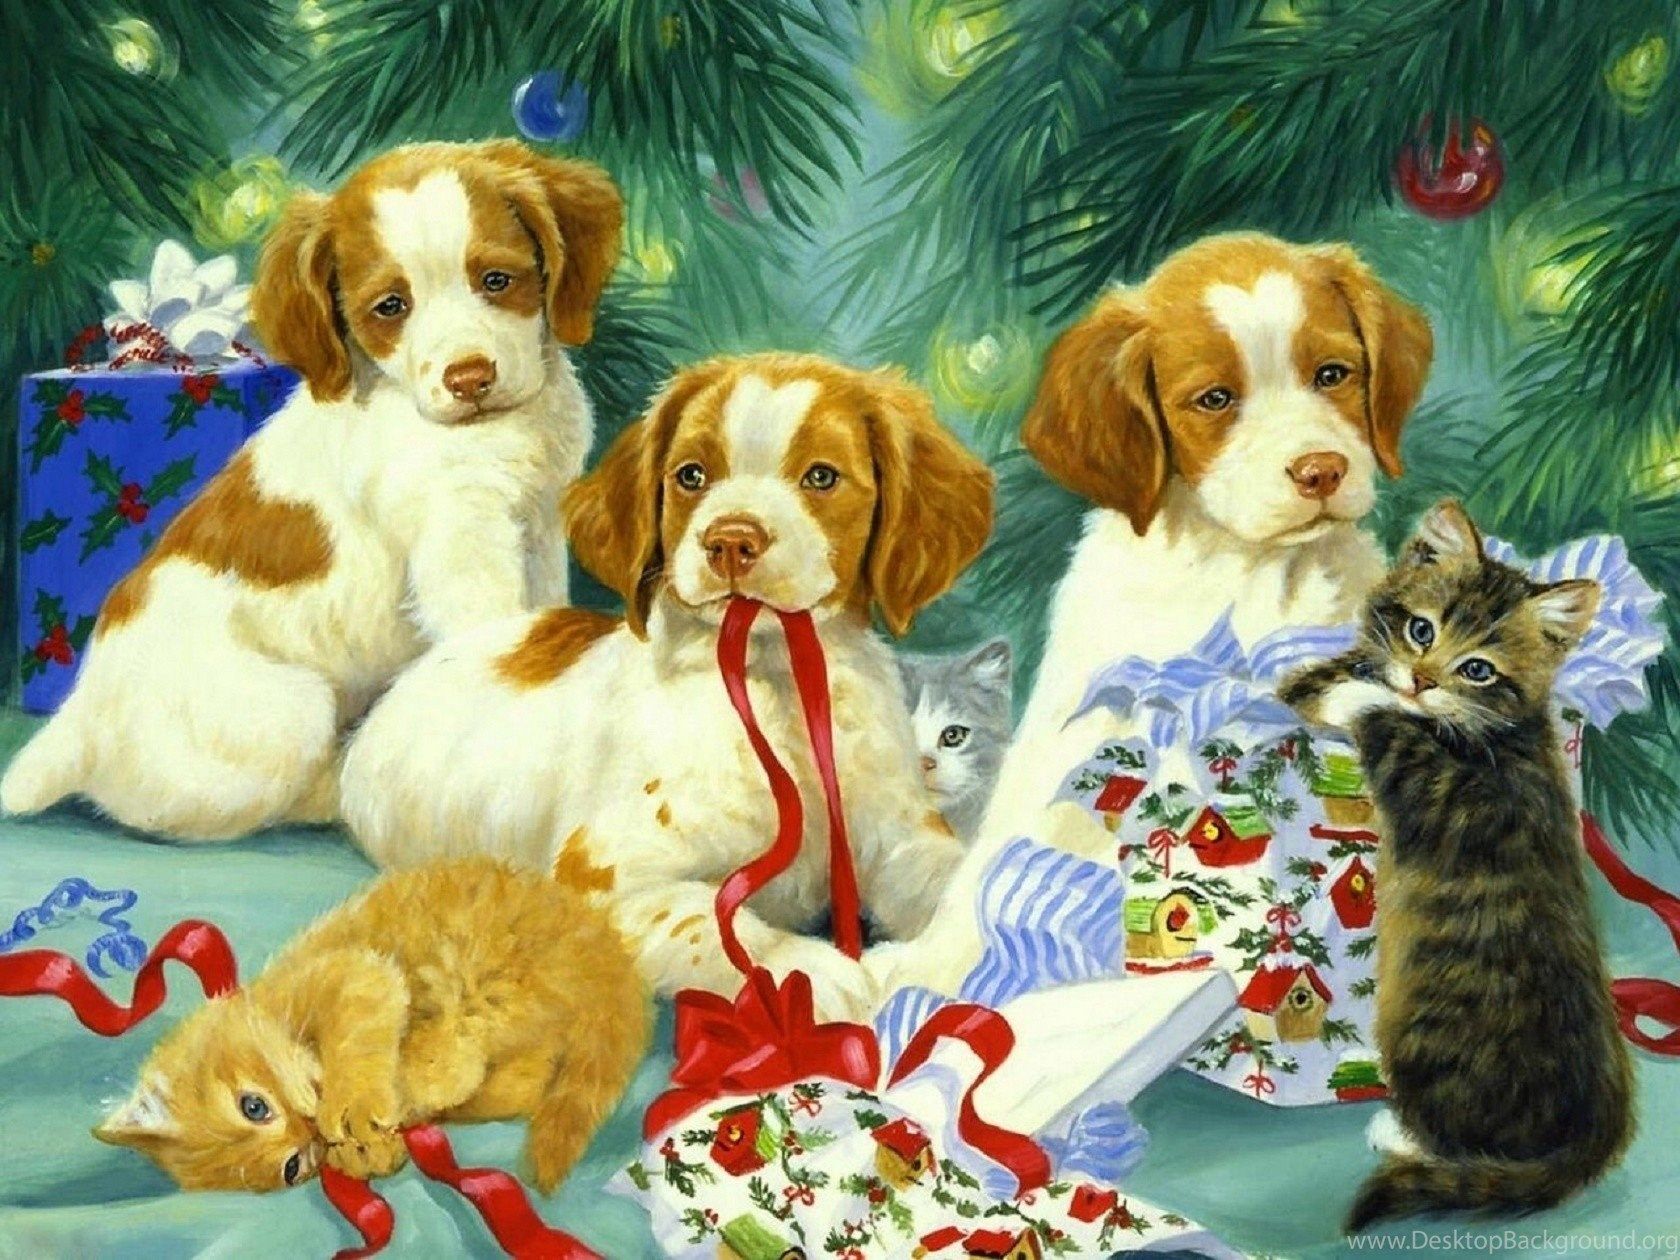 Wallpaper Of Puppies And Kittens Wallpaper